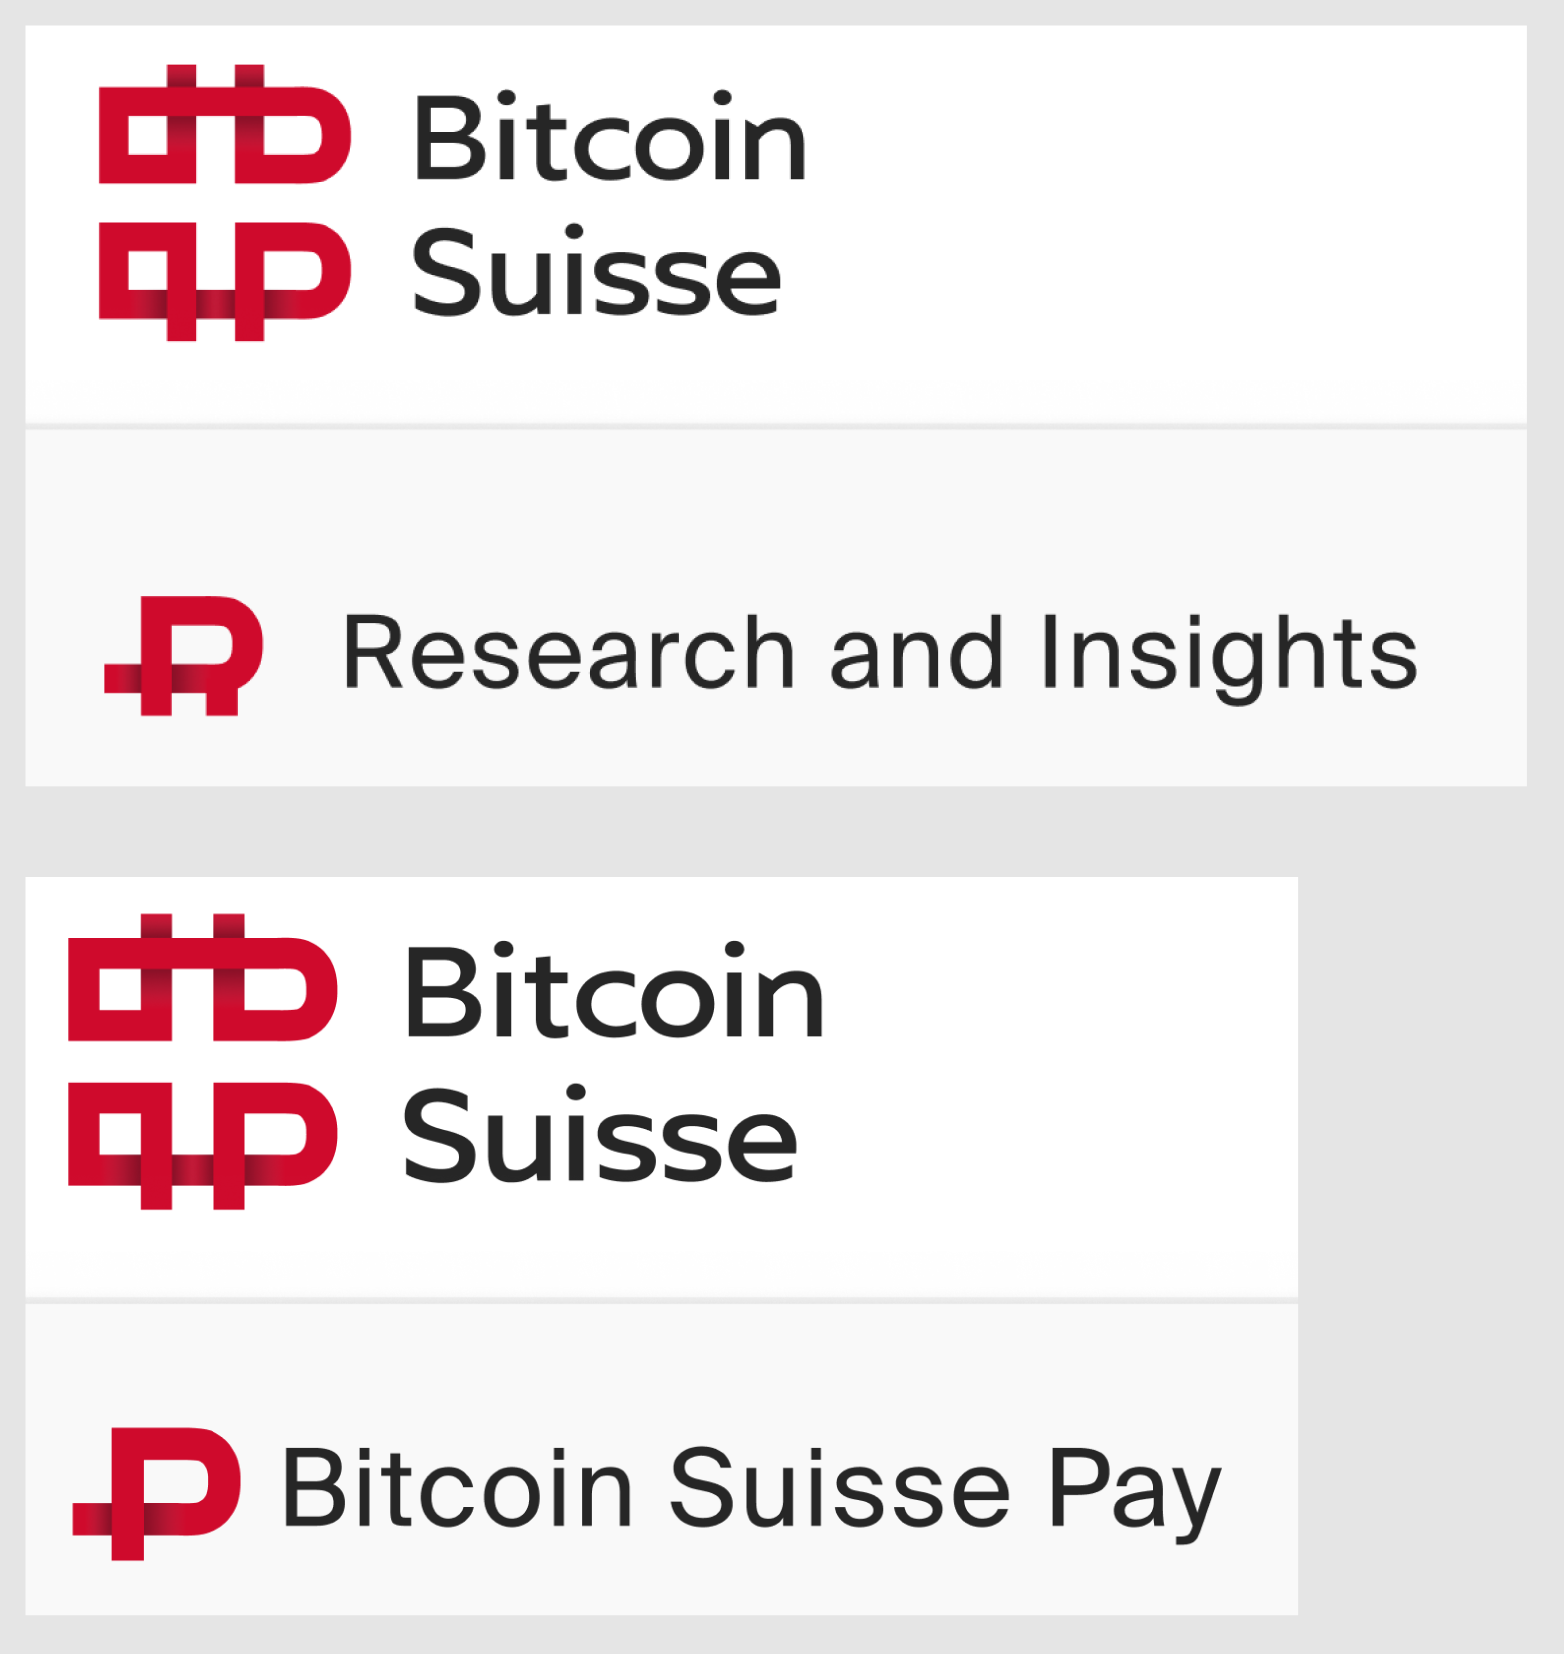 Bitcoin Suisse Research